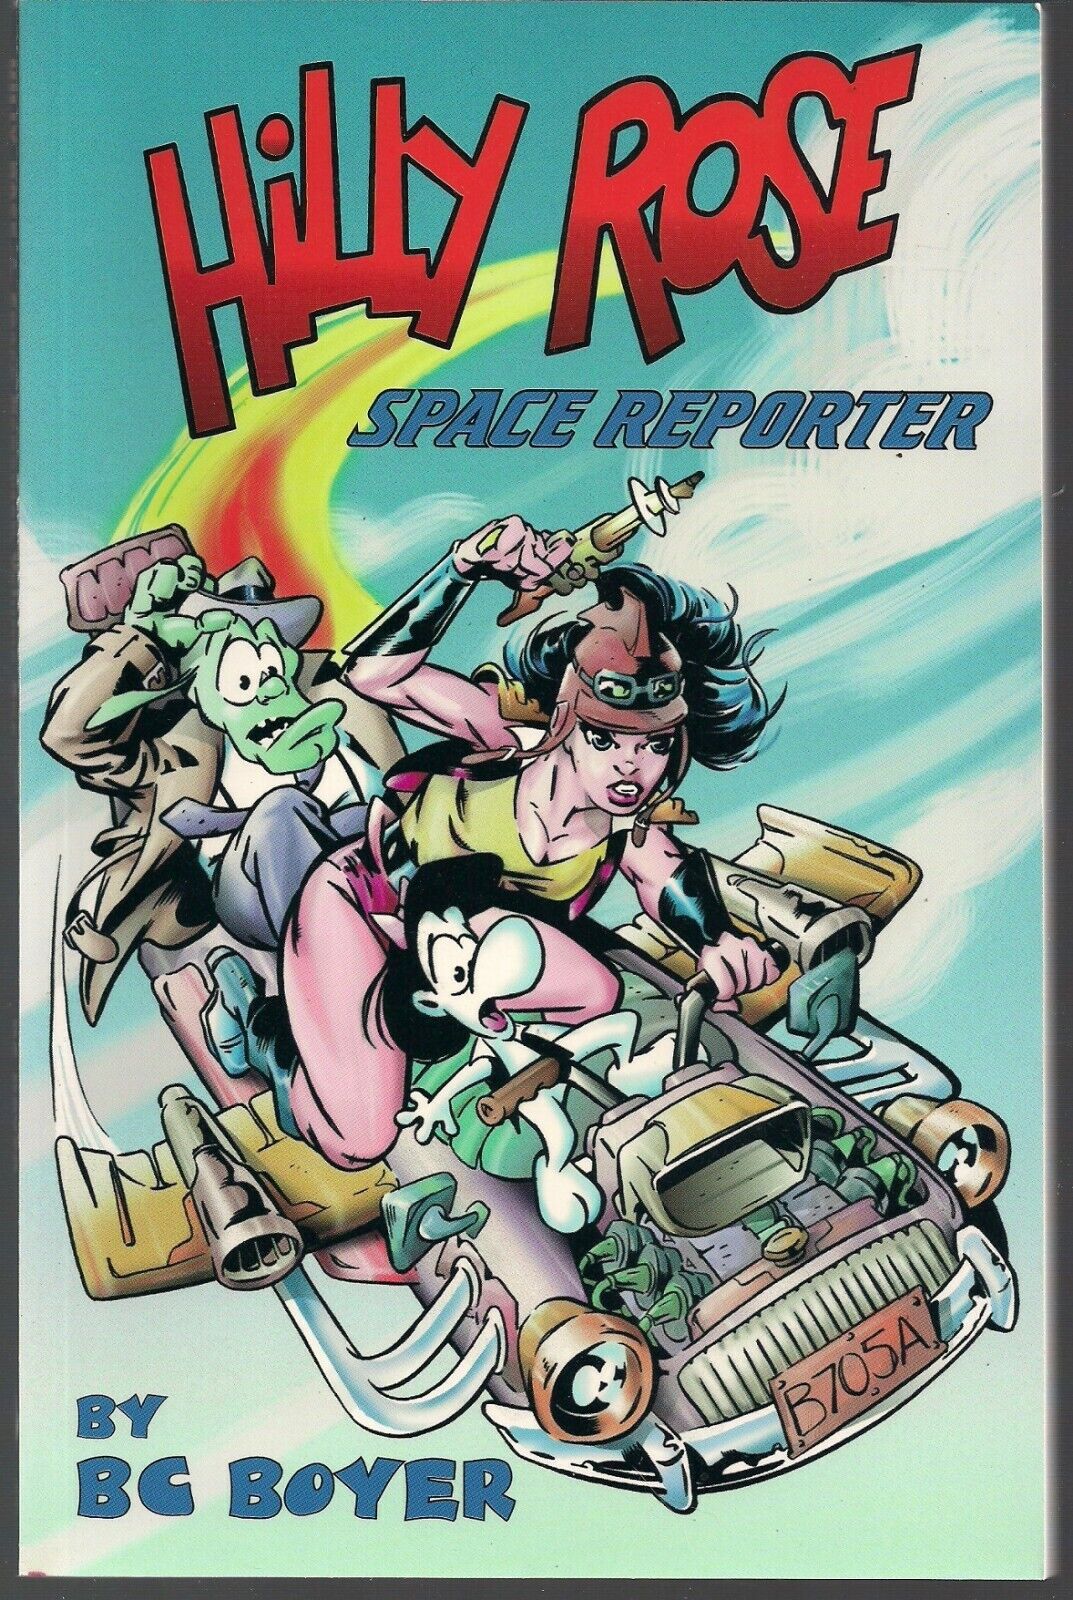 HILLY ROSE VOL 1 SPACE REPORTER 1996 SOFTCVR GN TPB FUNNY ADVENTURE BC BOYER NEW